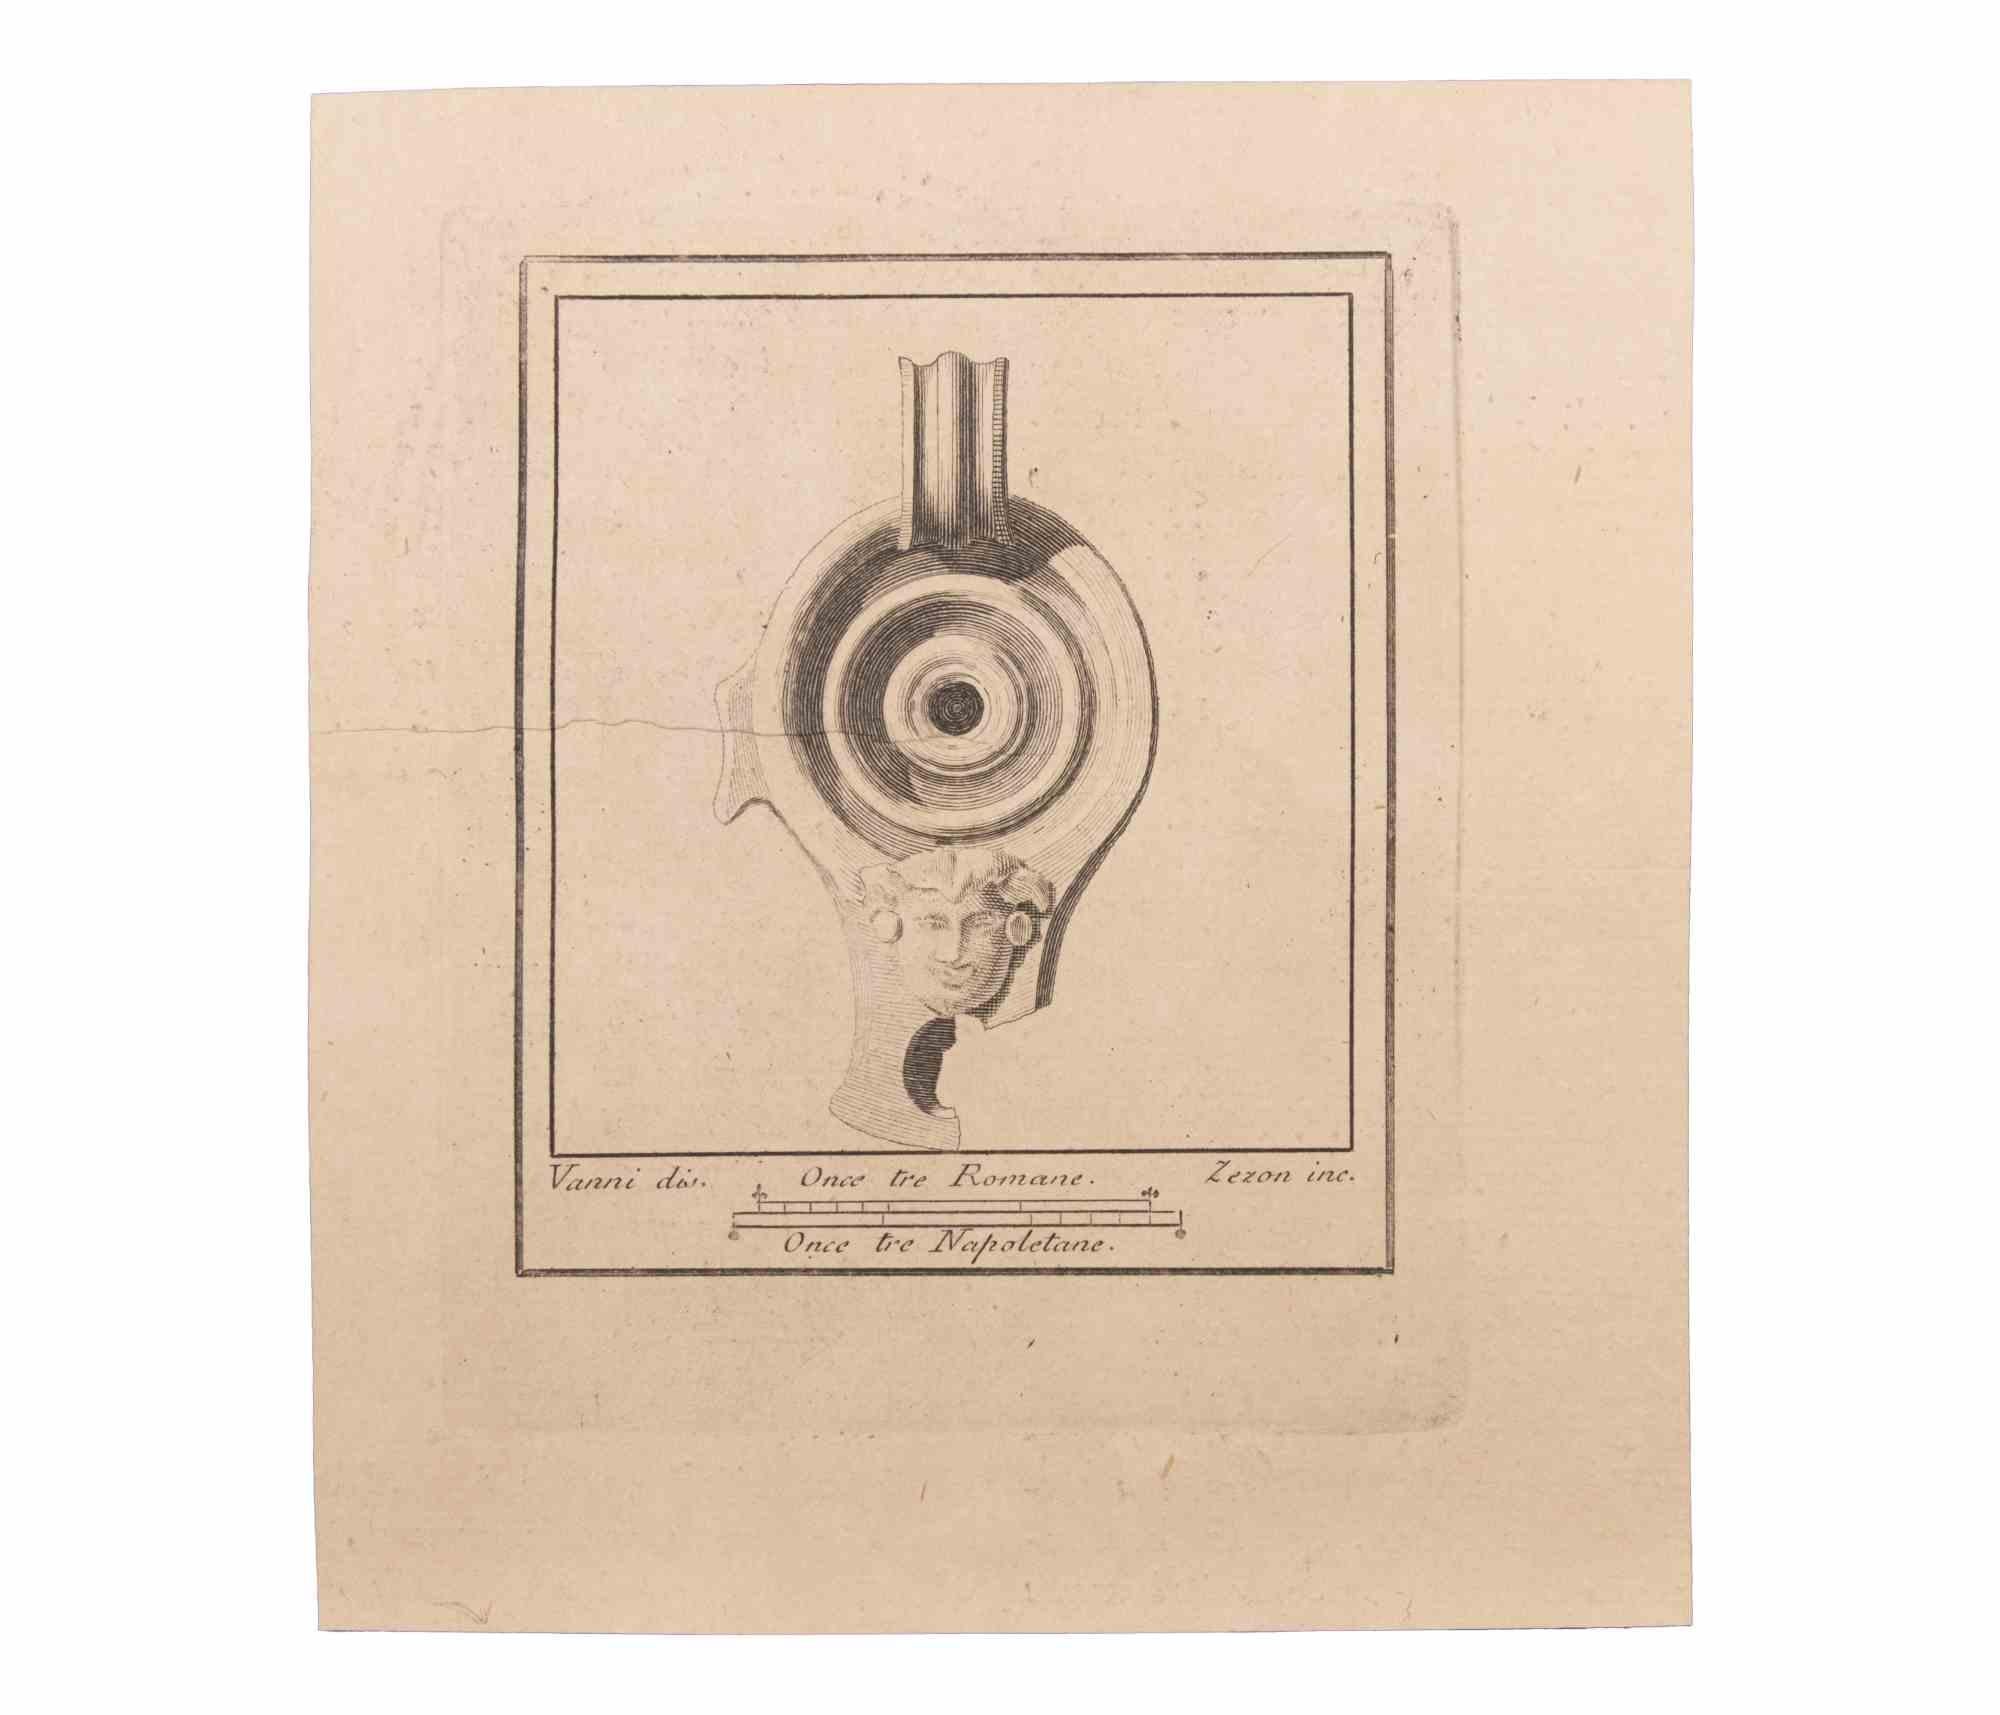 Oil Lamp With Decoration is an Etching realized by  Niccolò Vanni (1750-1770).

The etching belongs to the print suite “Antiquities of Herculaneum Exposed” (original title: “Le Antichità di Ercolano Esposte”), an eight-volume volume of engravings of